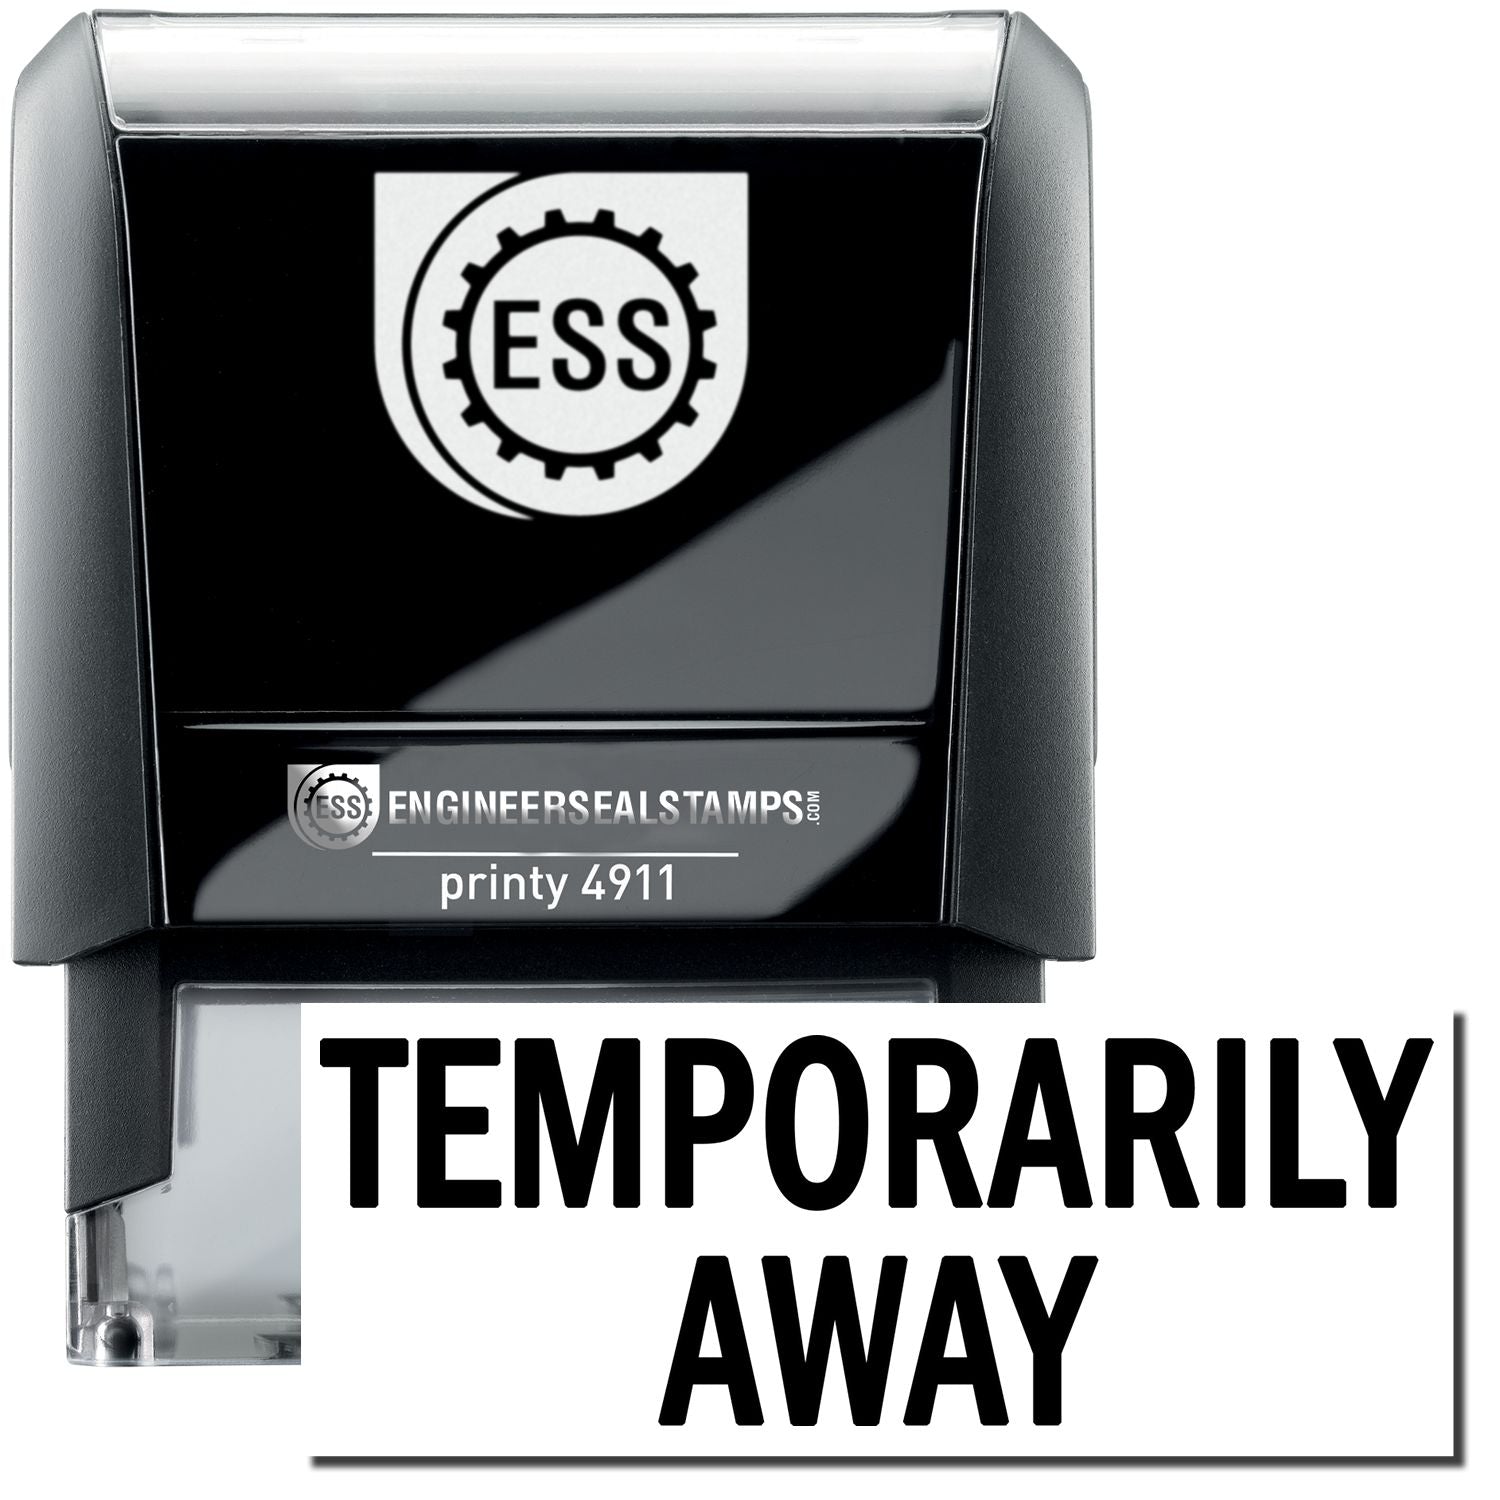 A self-inking stamp with a stamped image showing how the text "TEMPORARILY AWAY" is displayed after stamping.